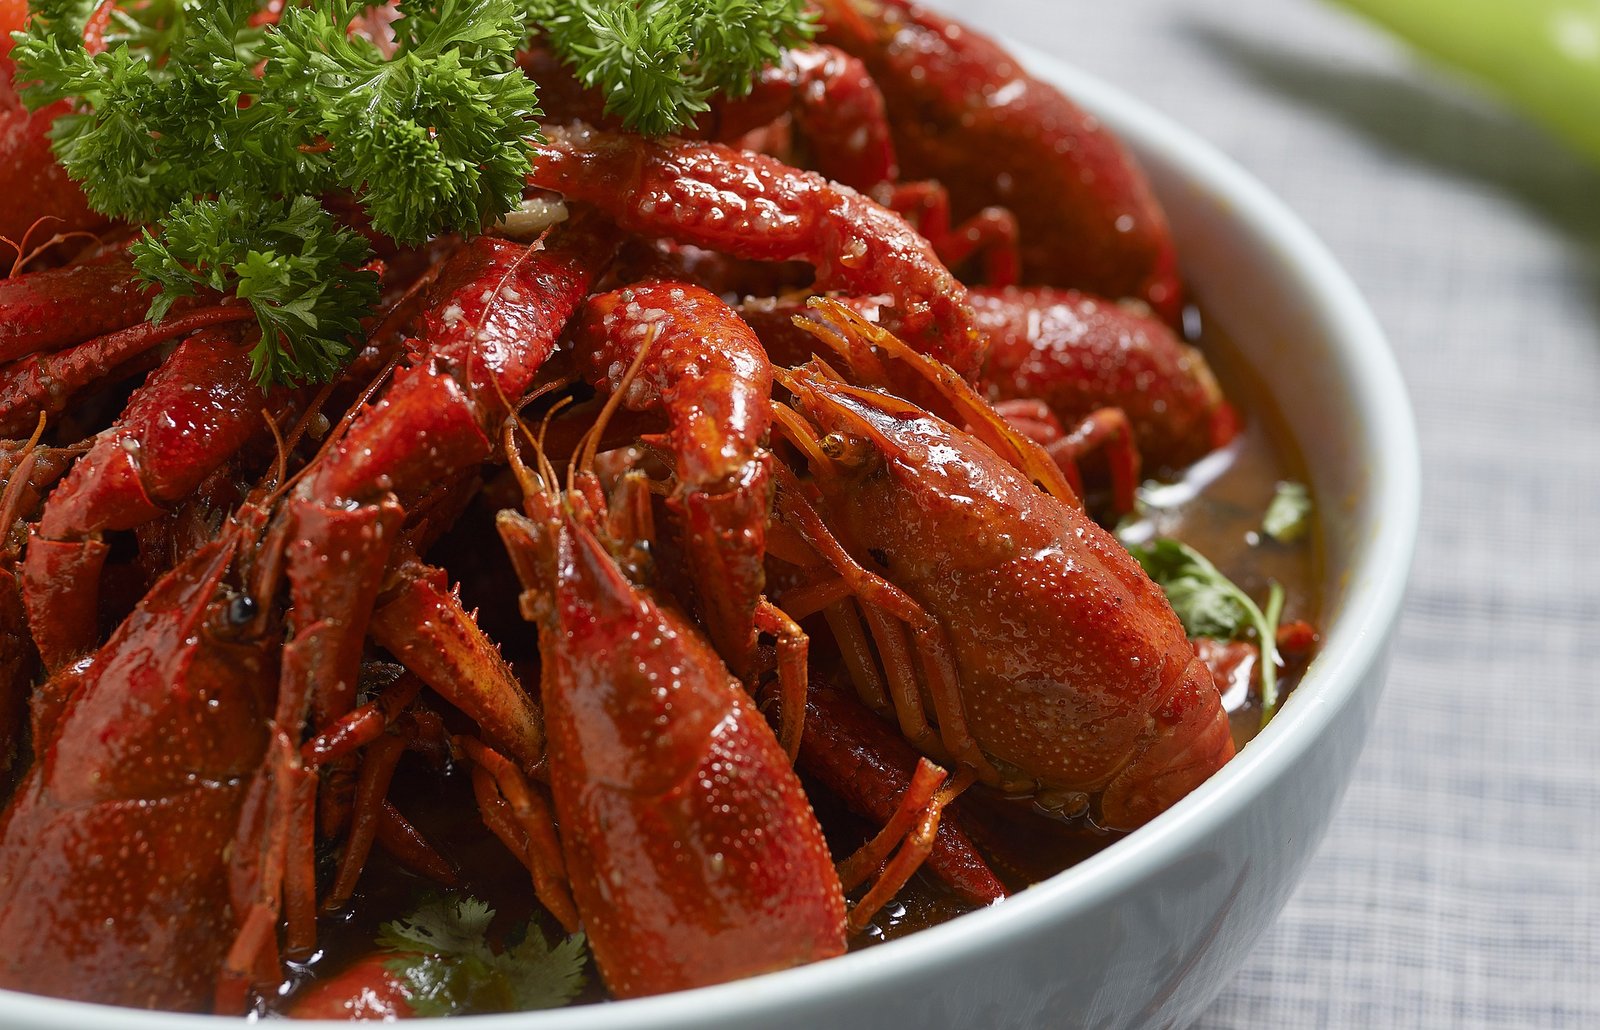 The Best Way To Reheat Crawfish And Avoid That Rubbery Texture